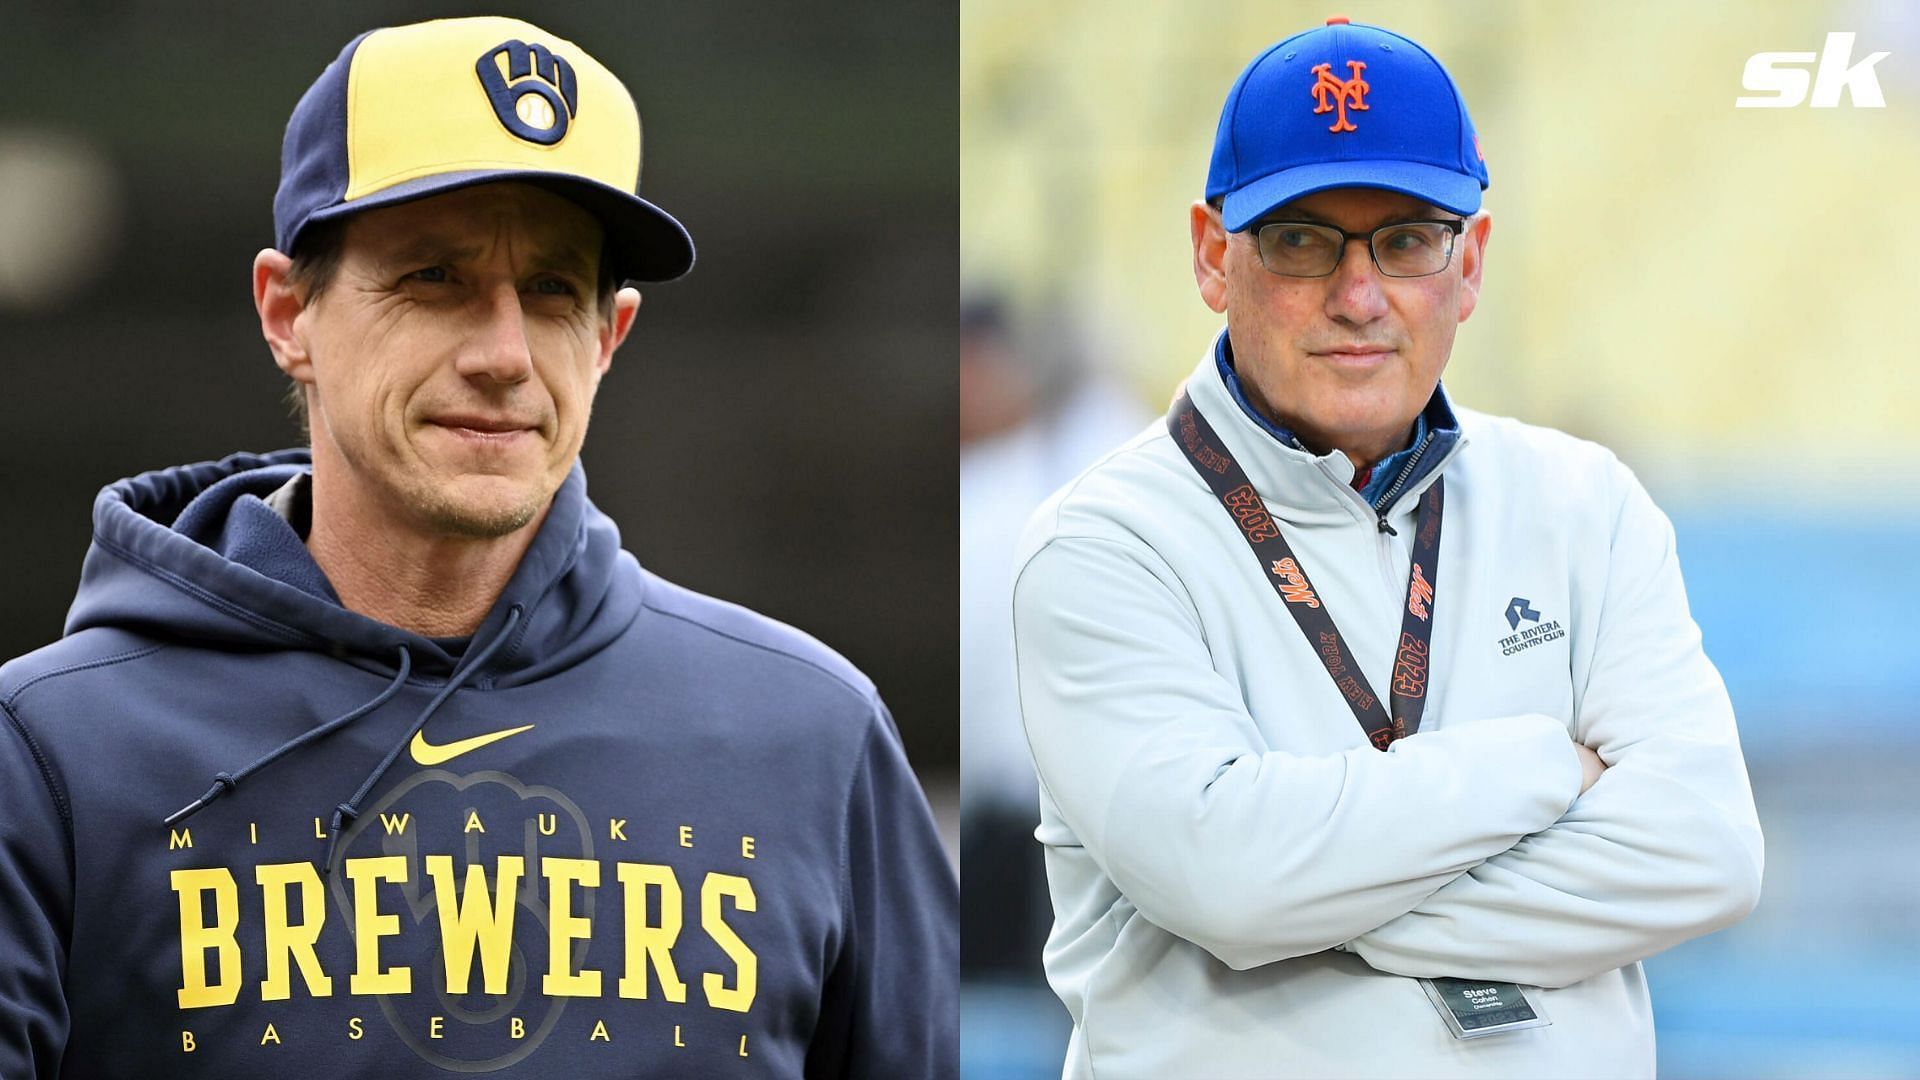 Craig Counsell continues to draw interest from the Mets regarding their top managerial job